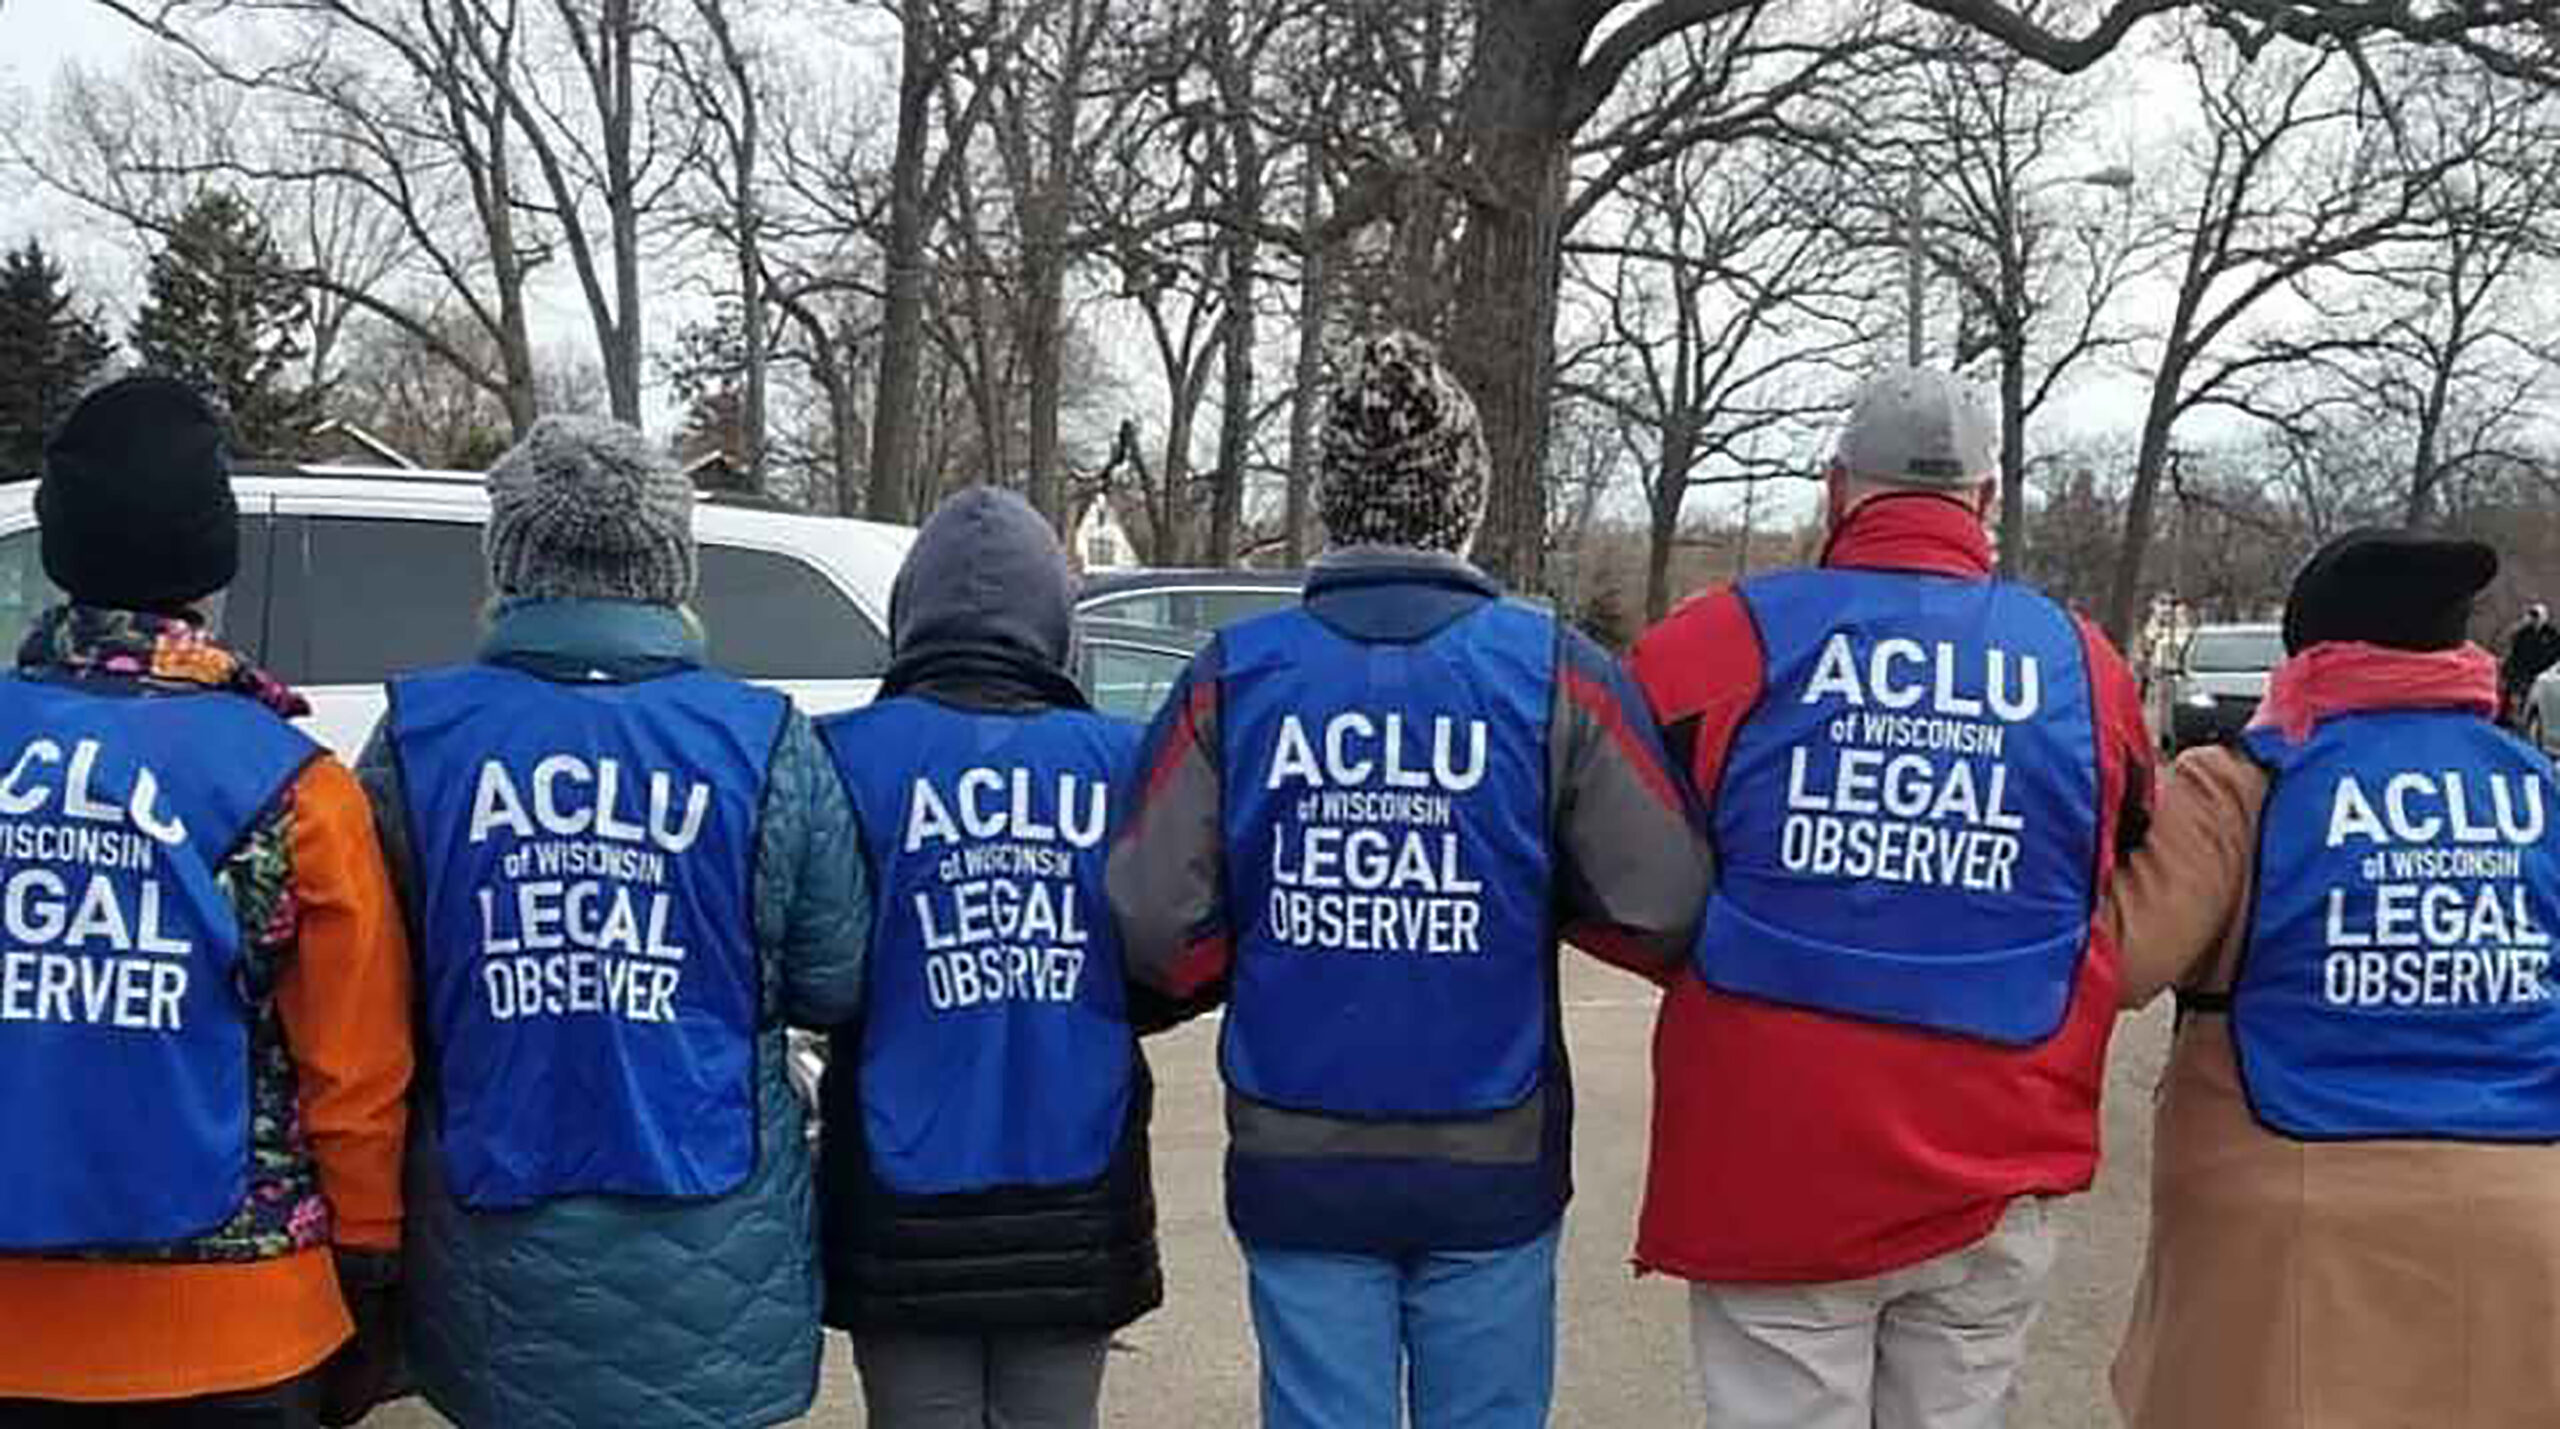 Legal observers from the American Civil Liberties Union of Wisconsin prepare for an event